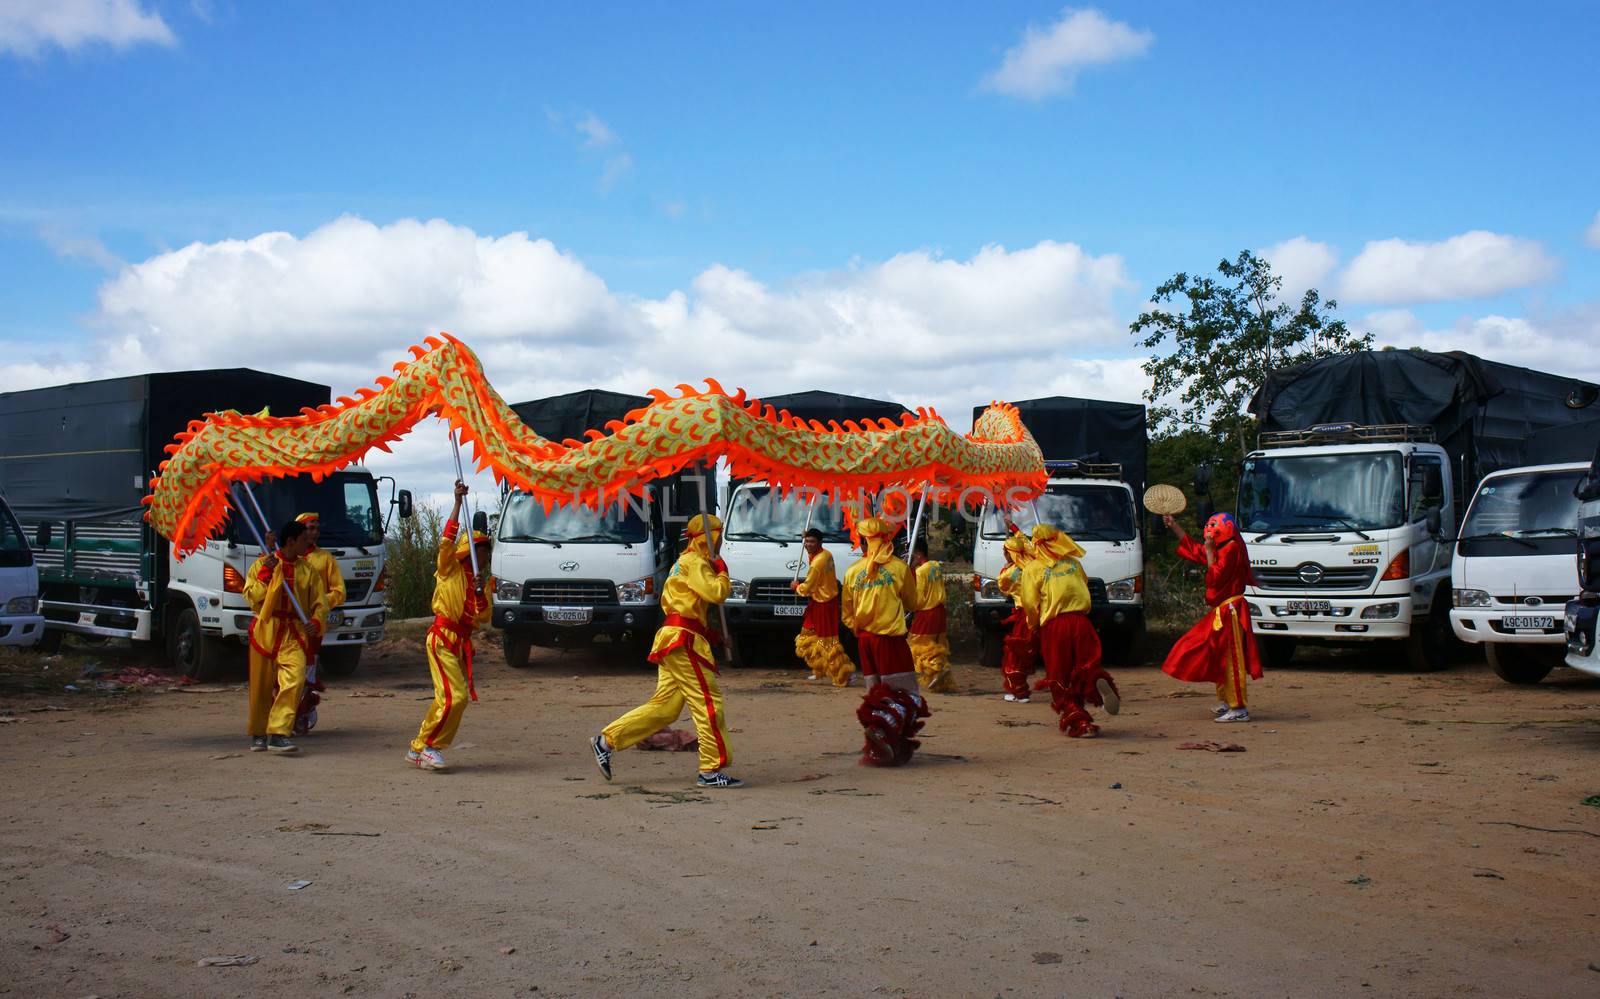 DA LAT, VIETNAM- JAN 31: Team of people perform dragon dance at truck park to celebrate New Year, this is oriental traditional custom to wish lucky , Viet Nam, Jan 31, 2014                           